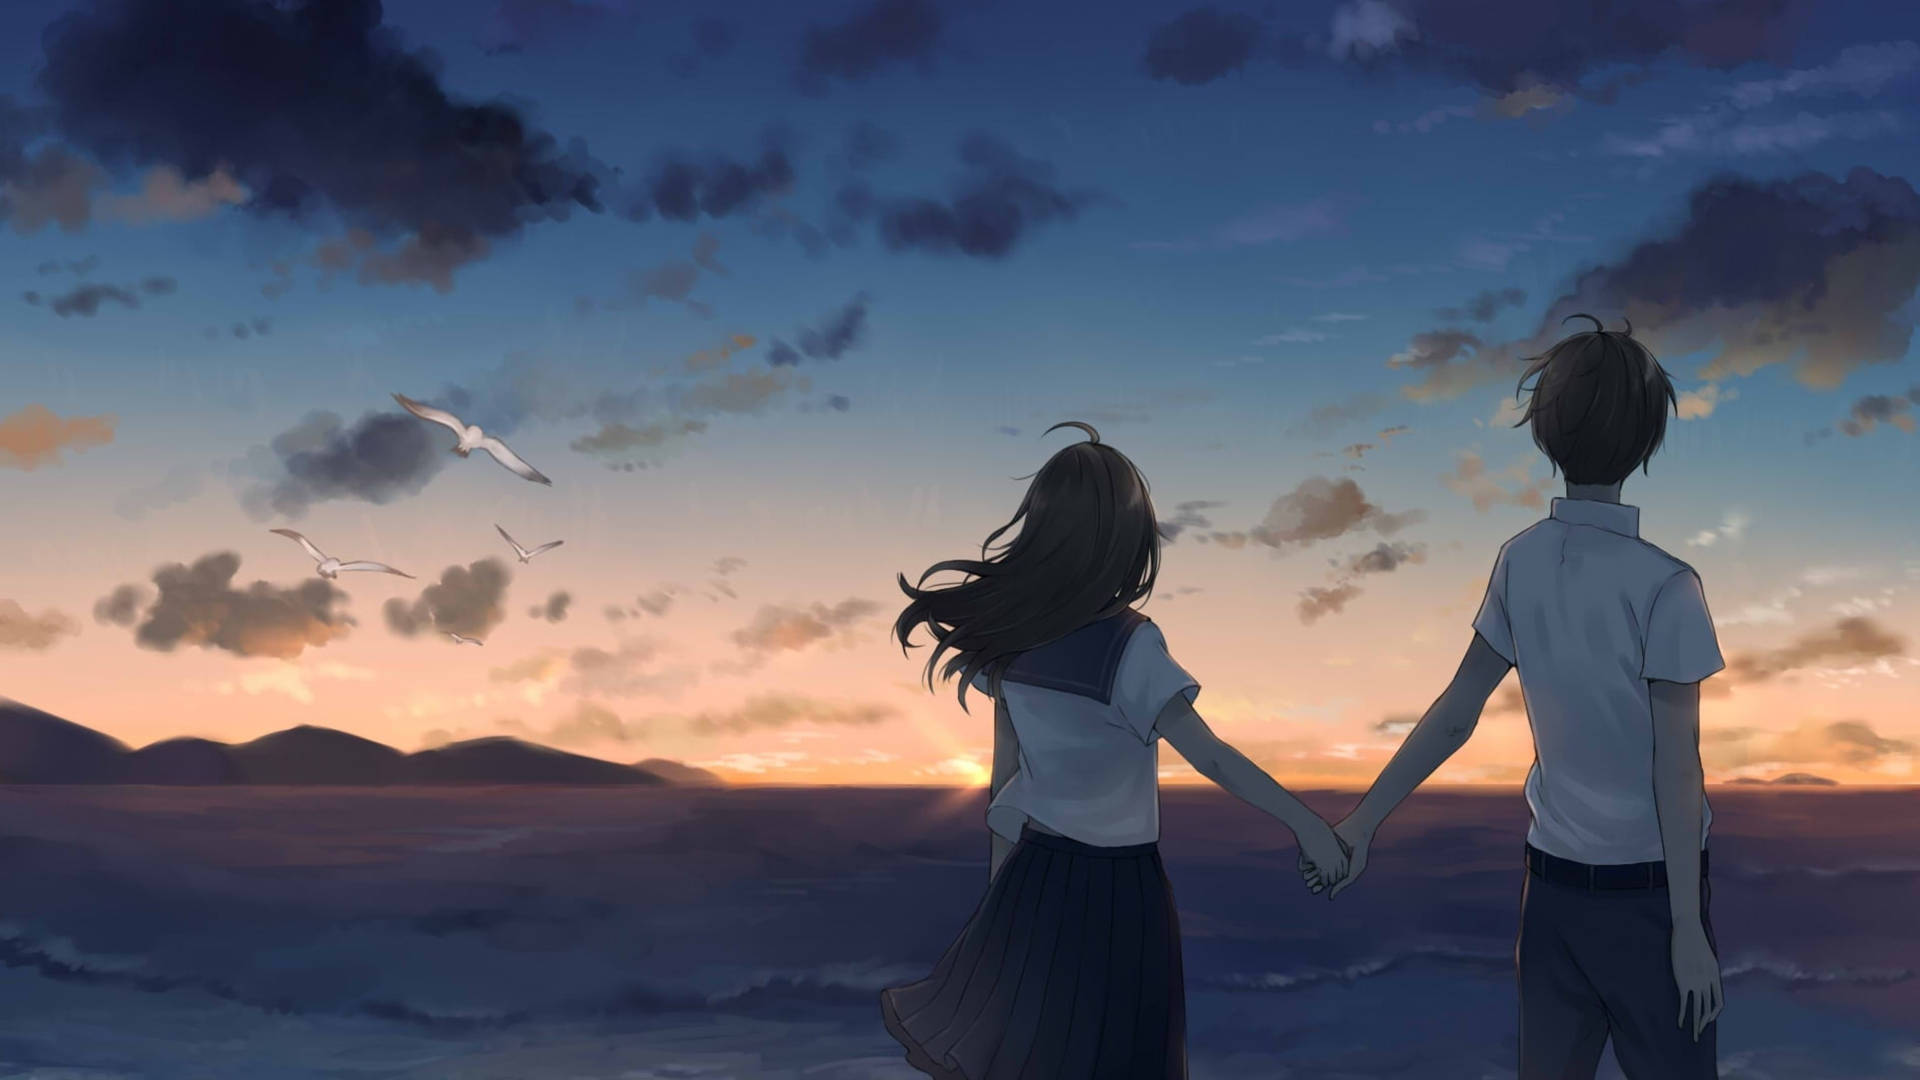 Download Cute Anime Couple Holding Hands Sunset Wallpaper 